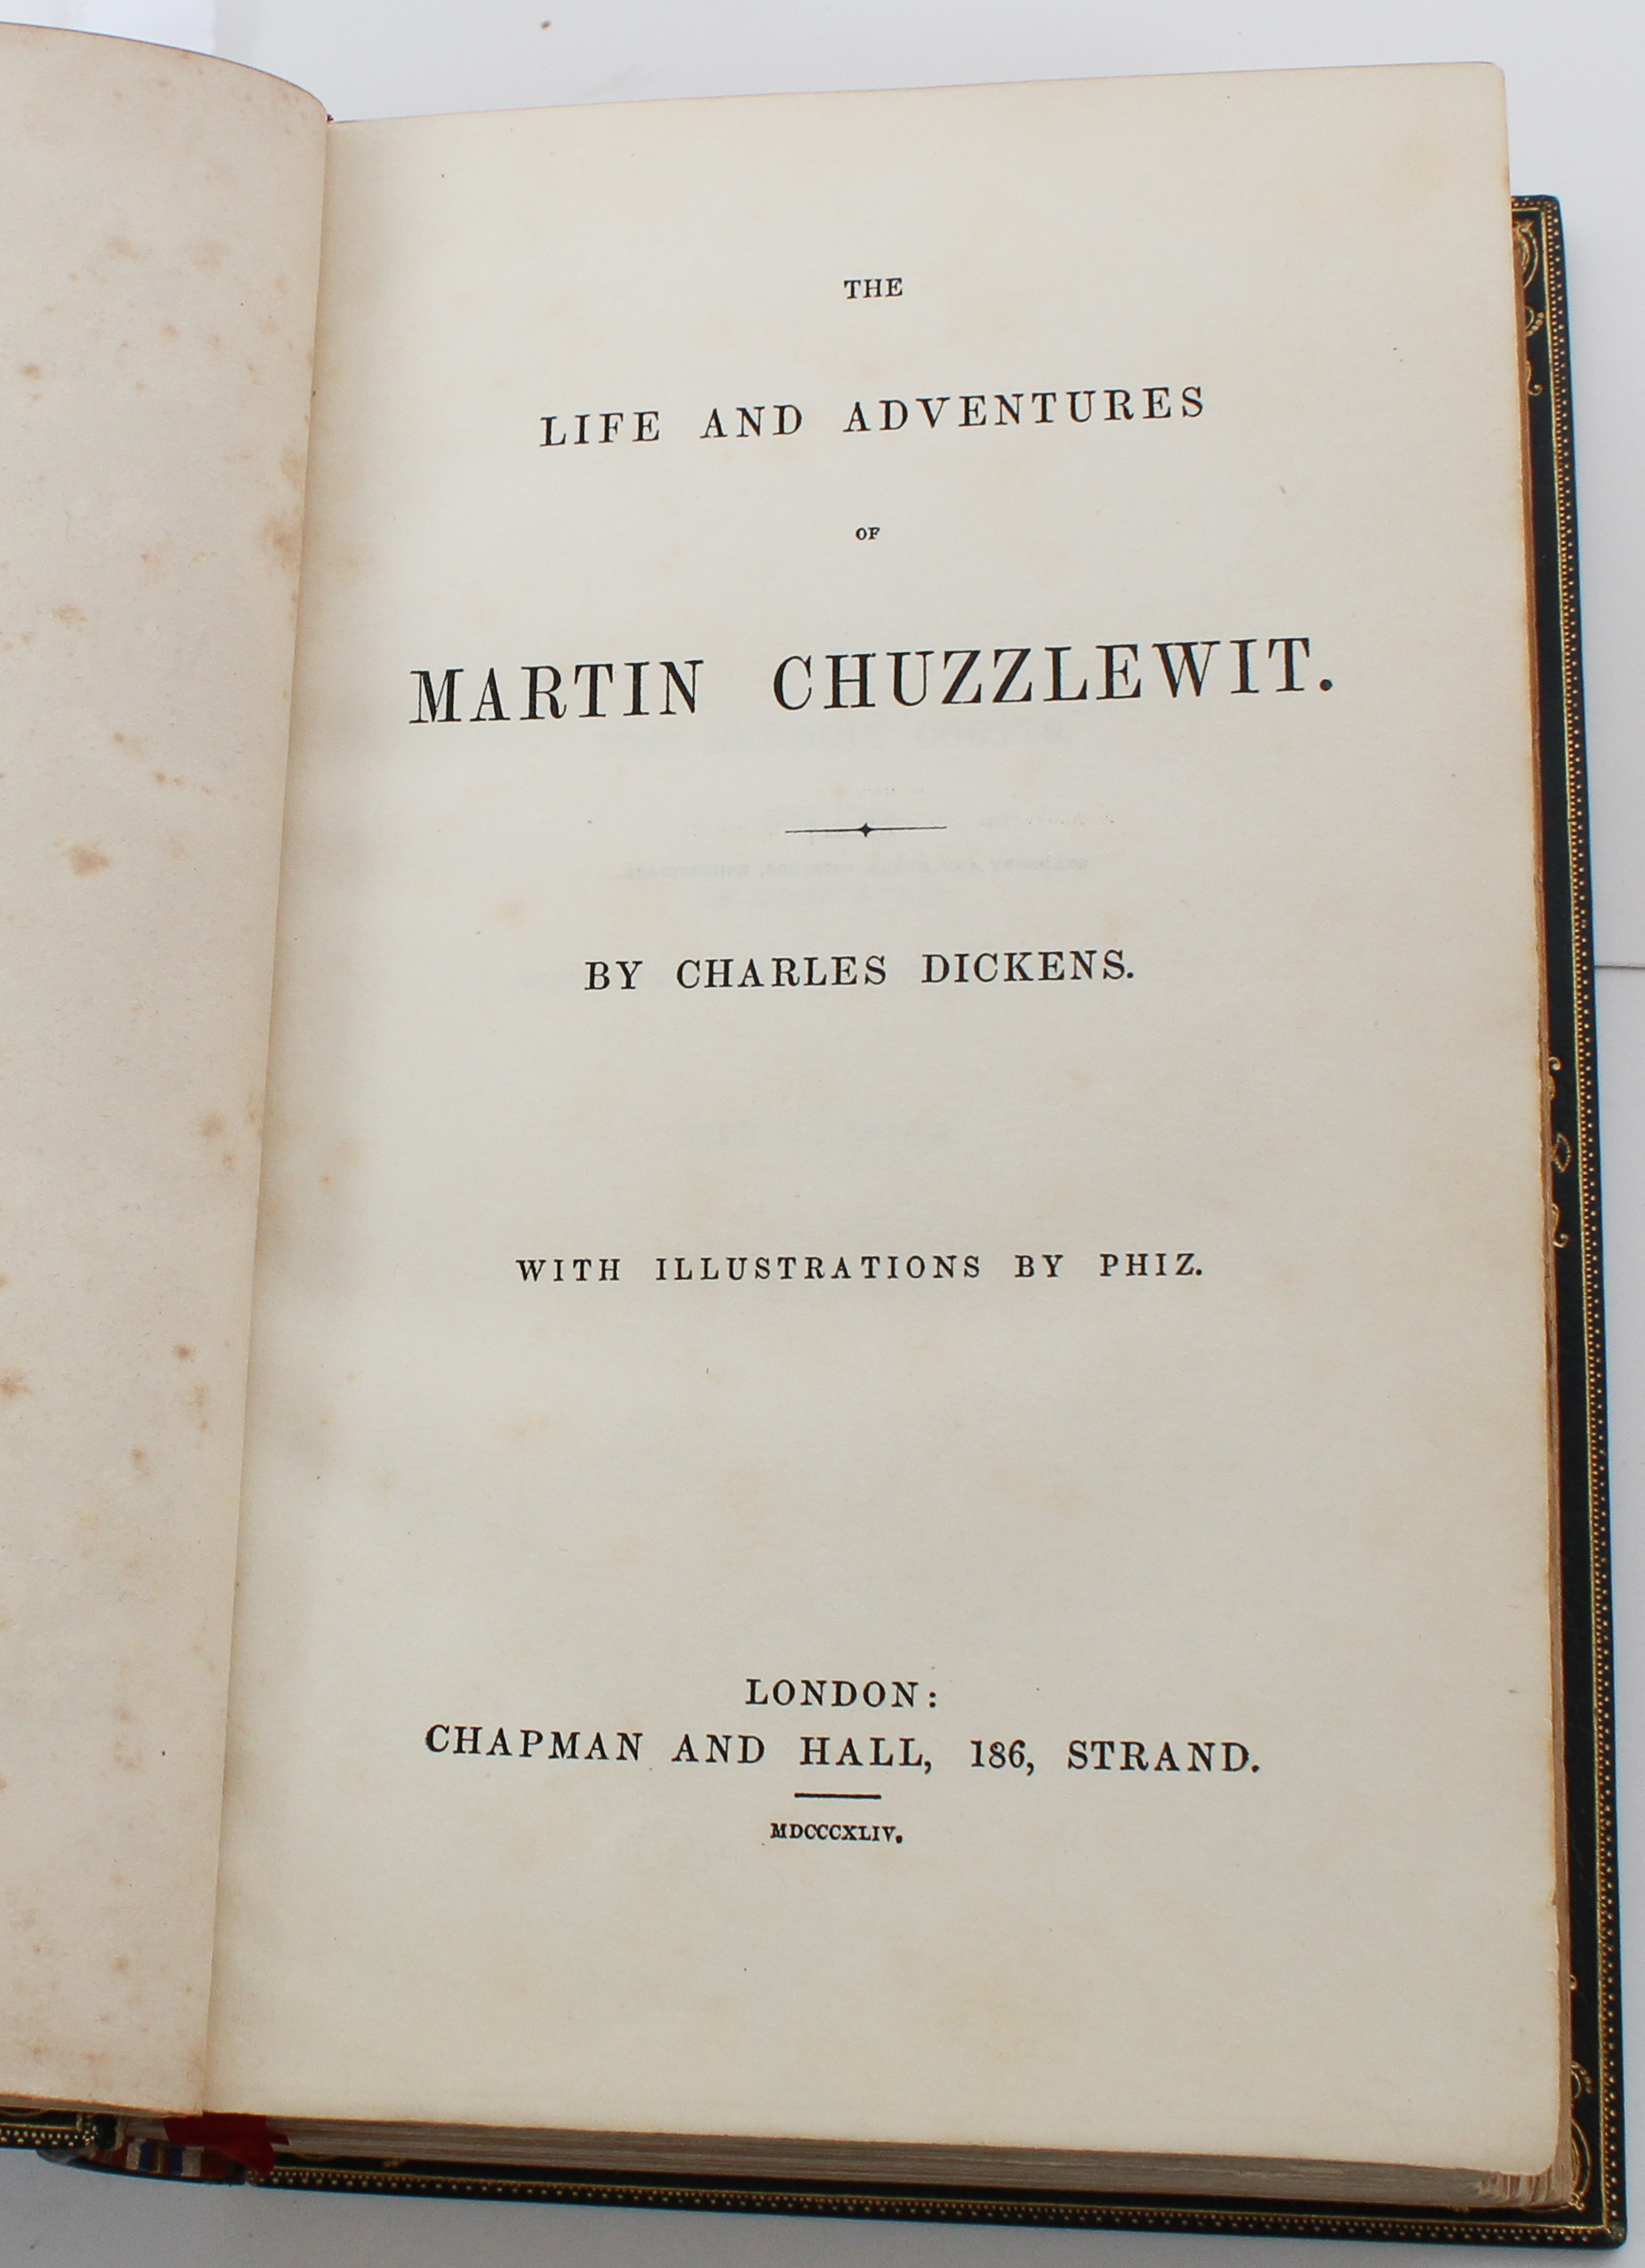 Charles Dickens, Martin Chuzzlewitt, First Ed 1844 - Image 5 of 6